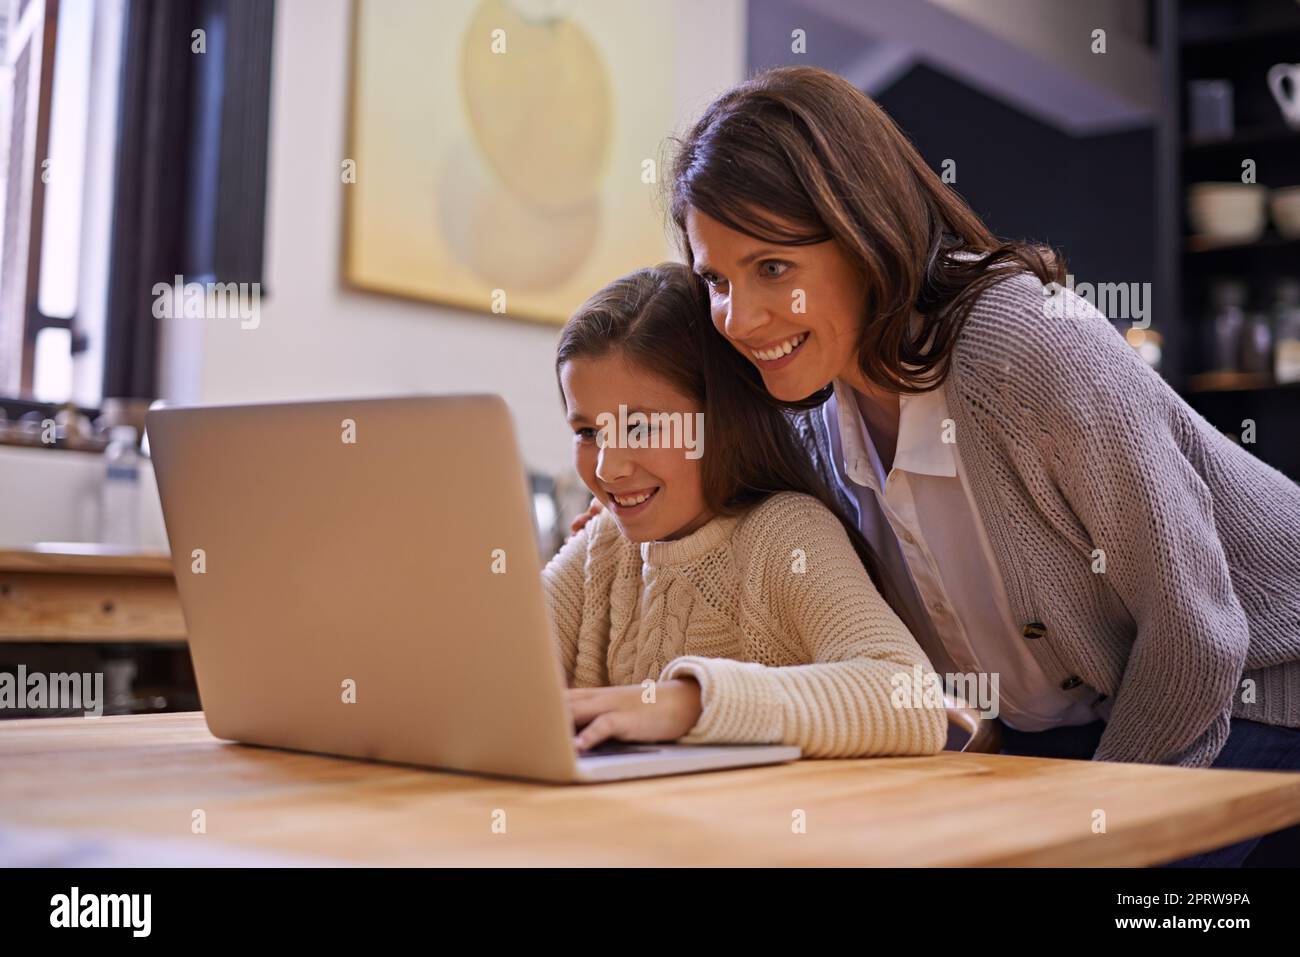 So many interesting things. a young girl studying with her mother nearby to help. Stock Photo